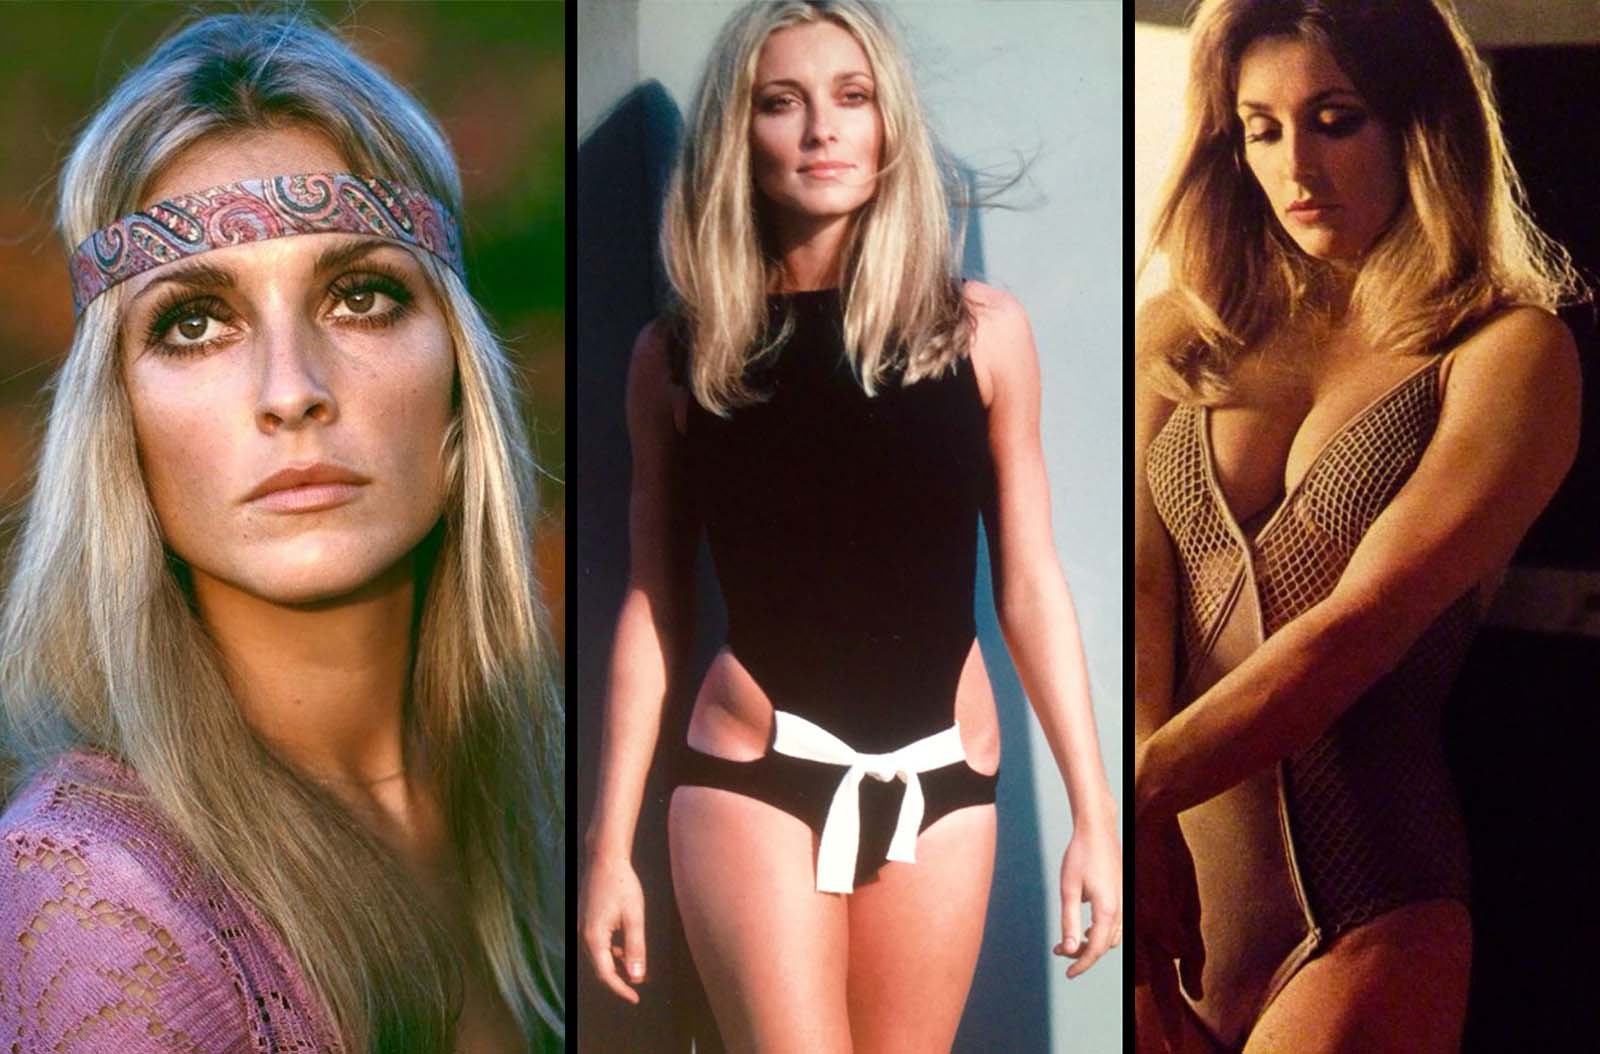 From Beauty to Tragedy: Candid and Beautiful Photos of Sharon Tate during the 1960s